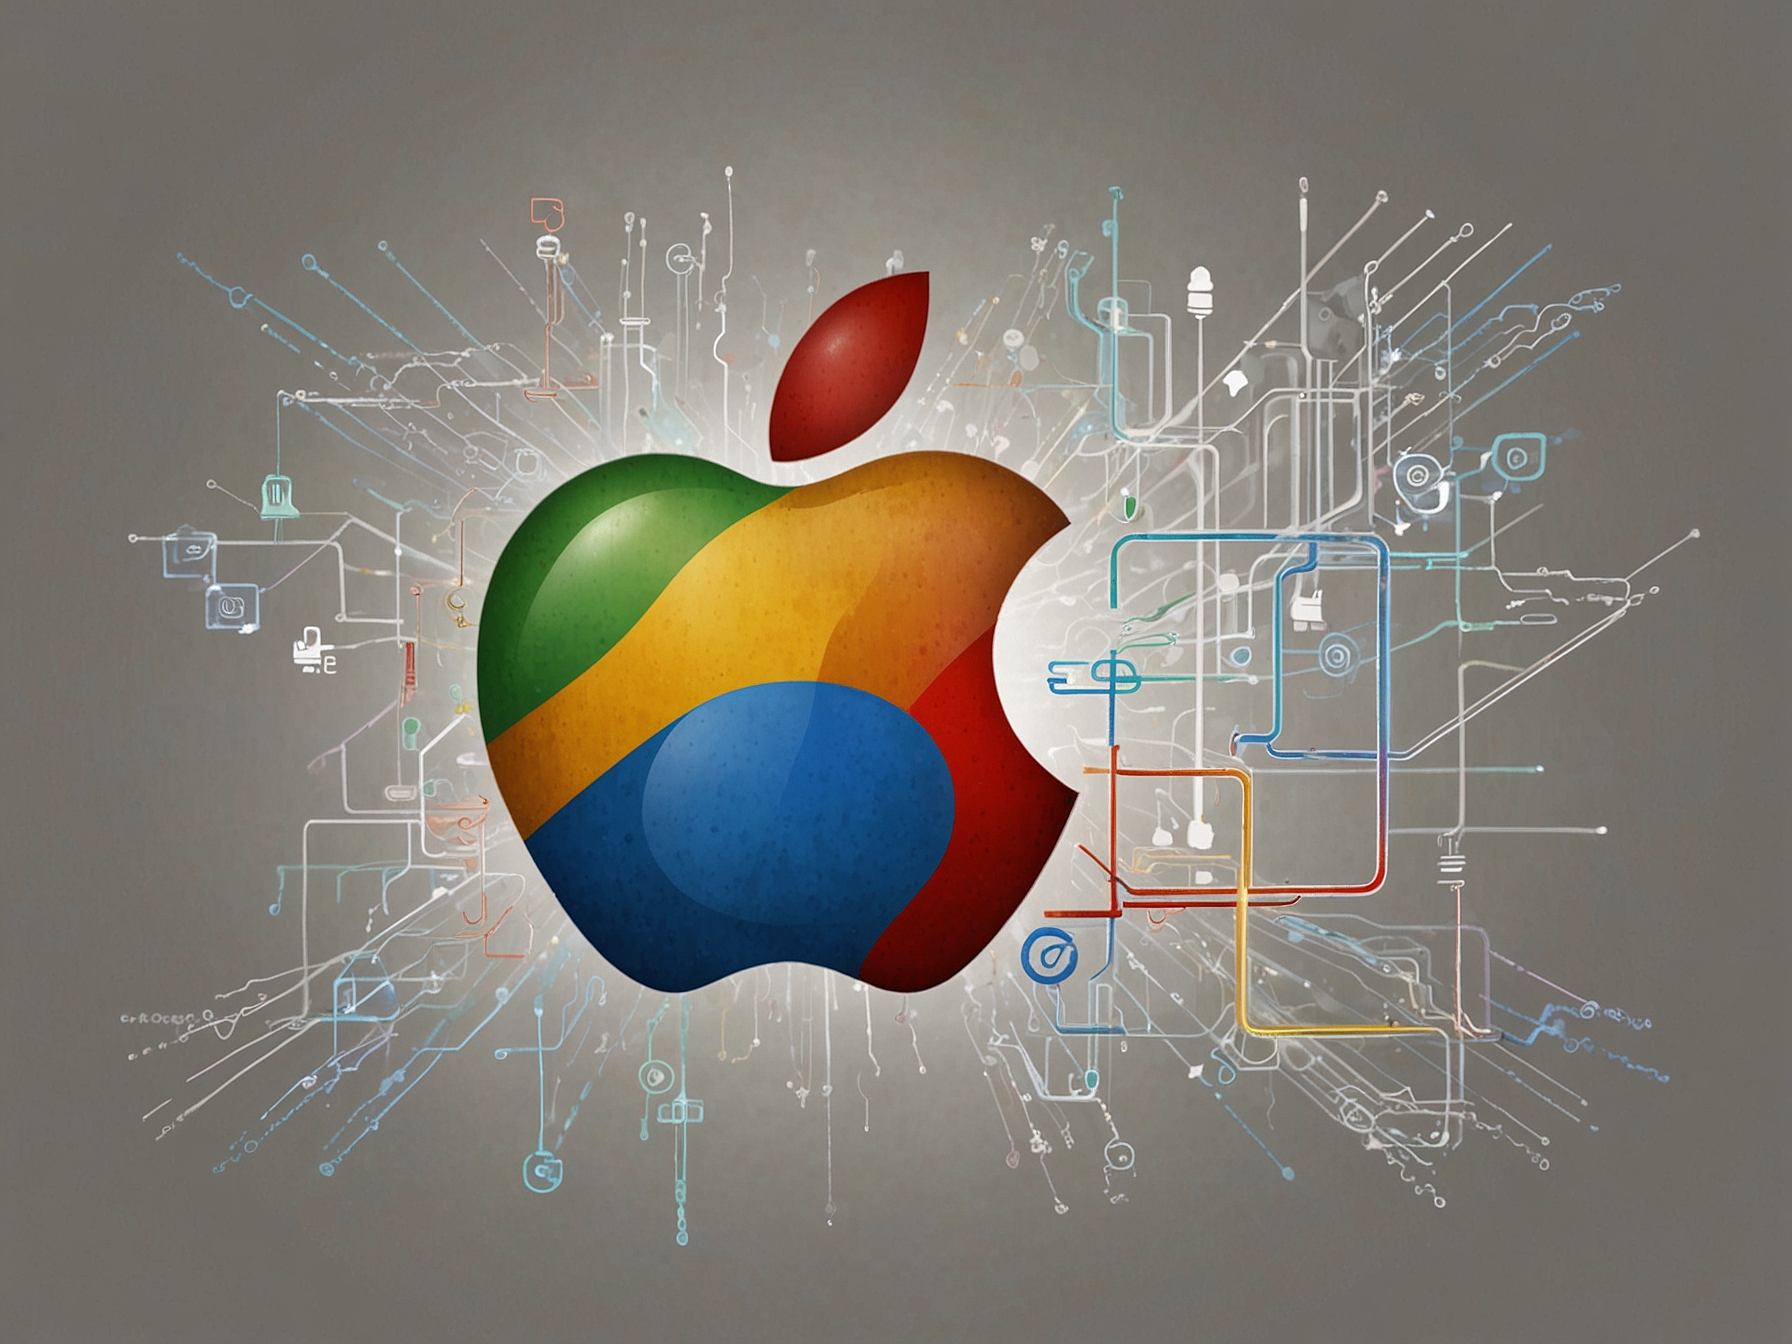 An illustration showing the Apple and Google logos interconnected, symbolizing their partnership in AI computing power.